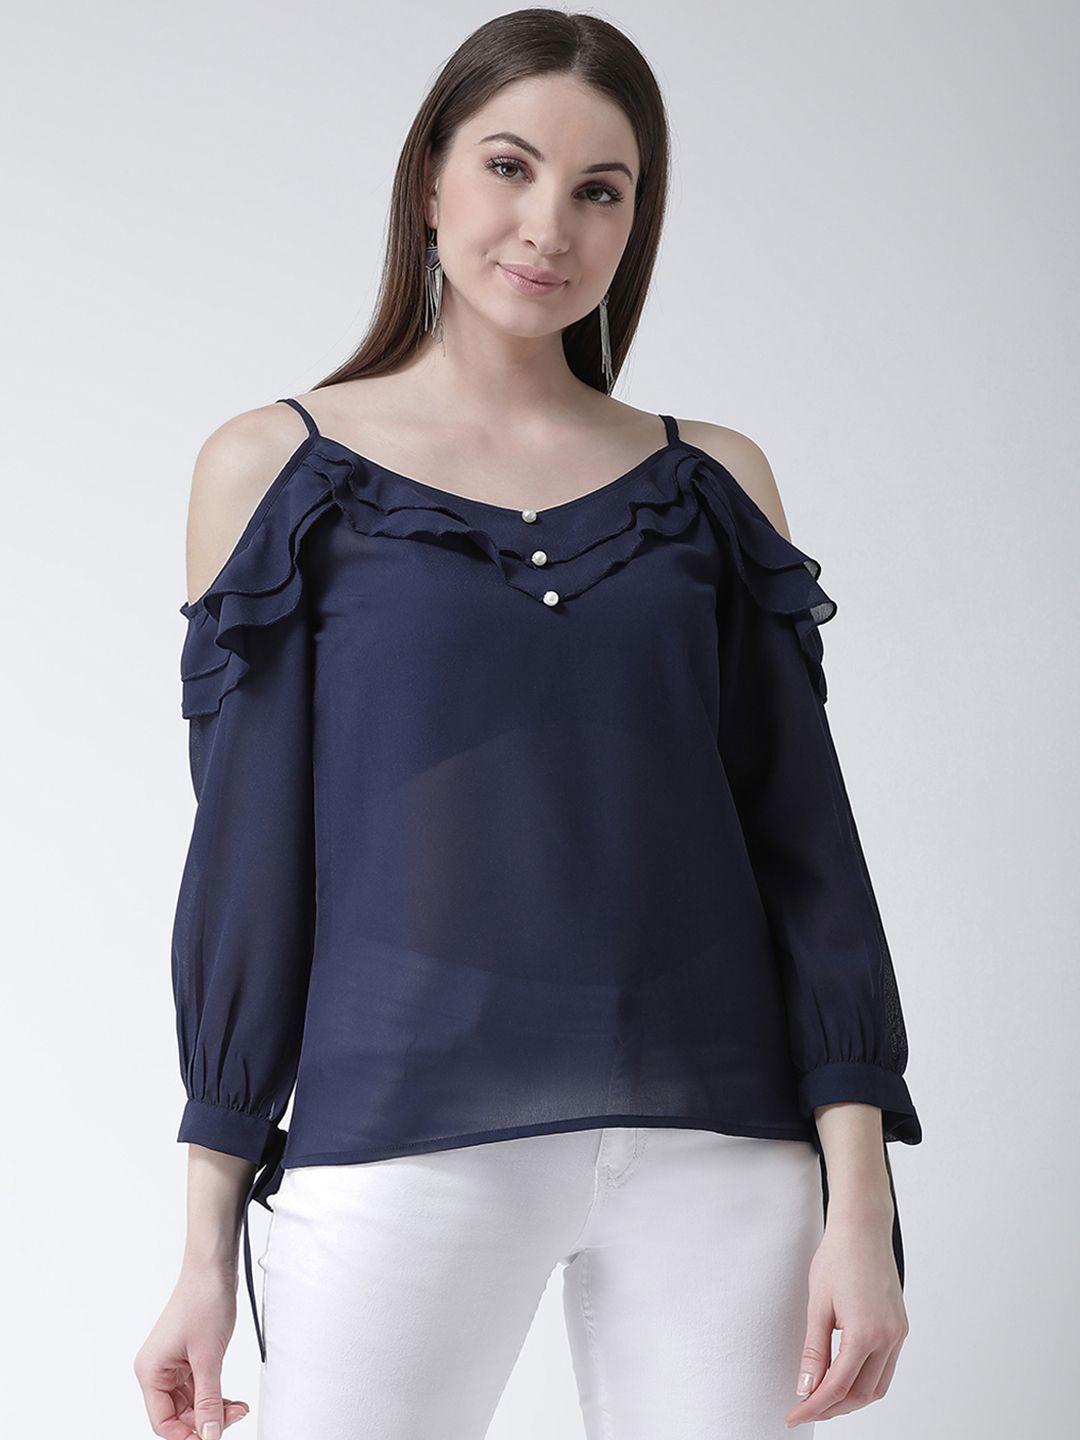 kassually women navy blue solid a-line top